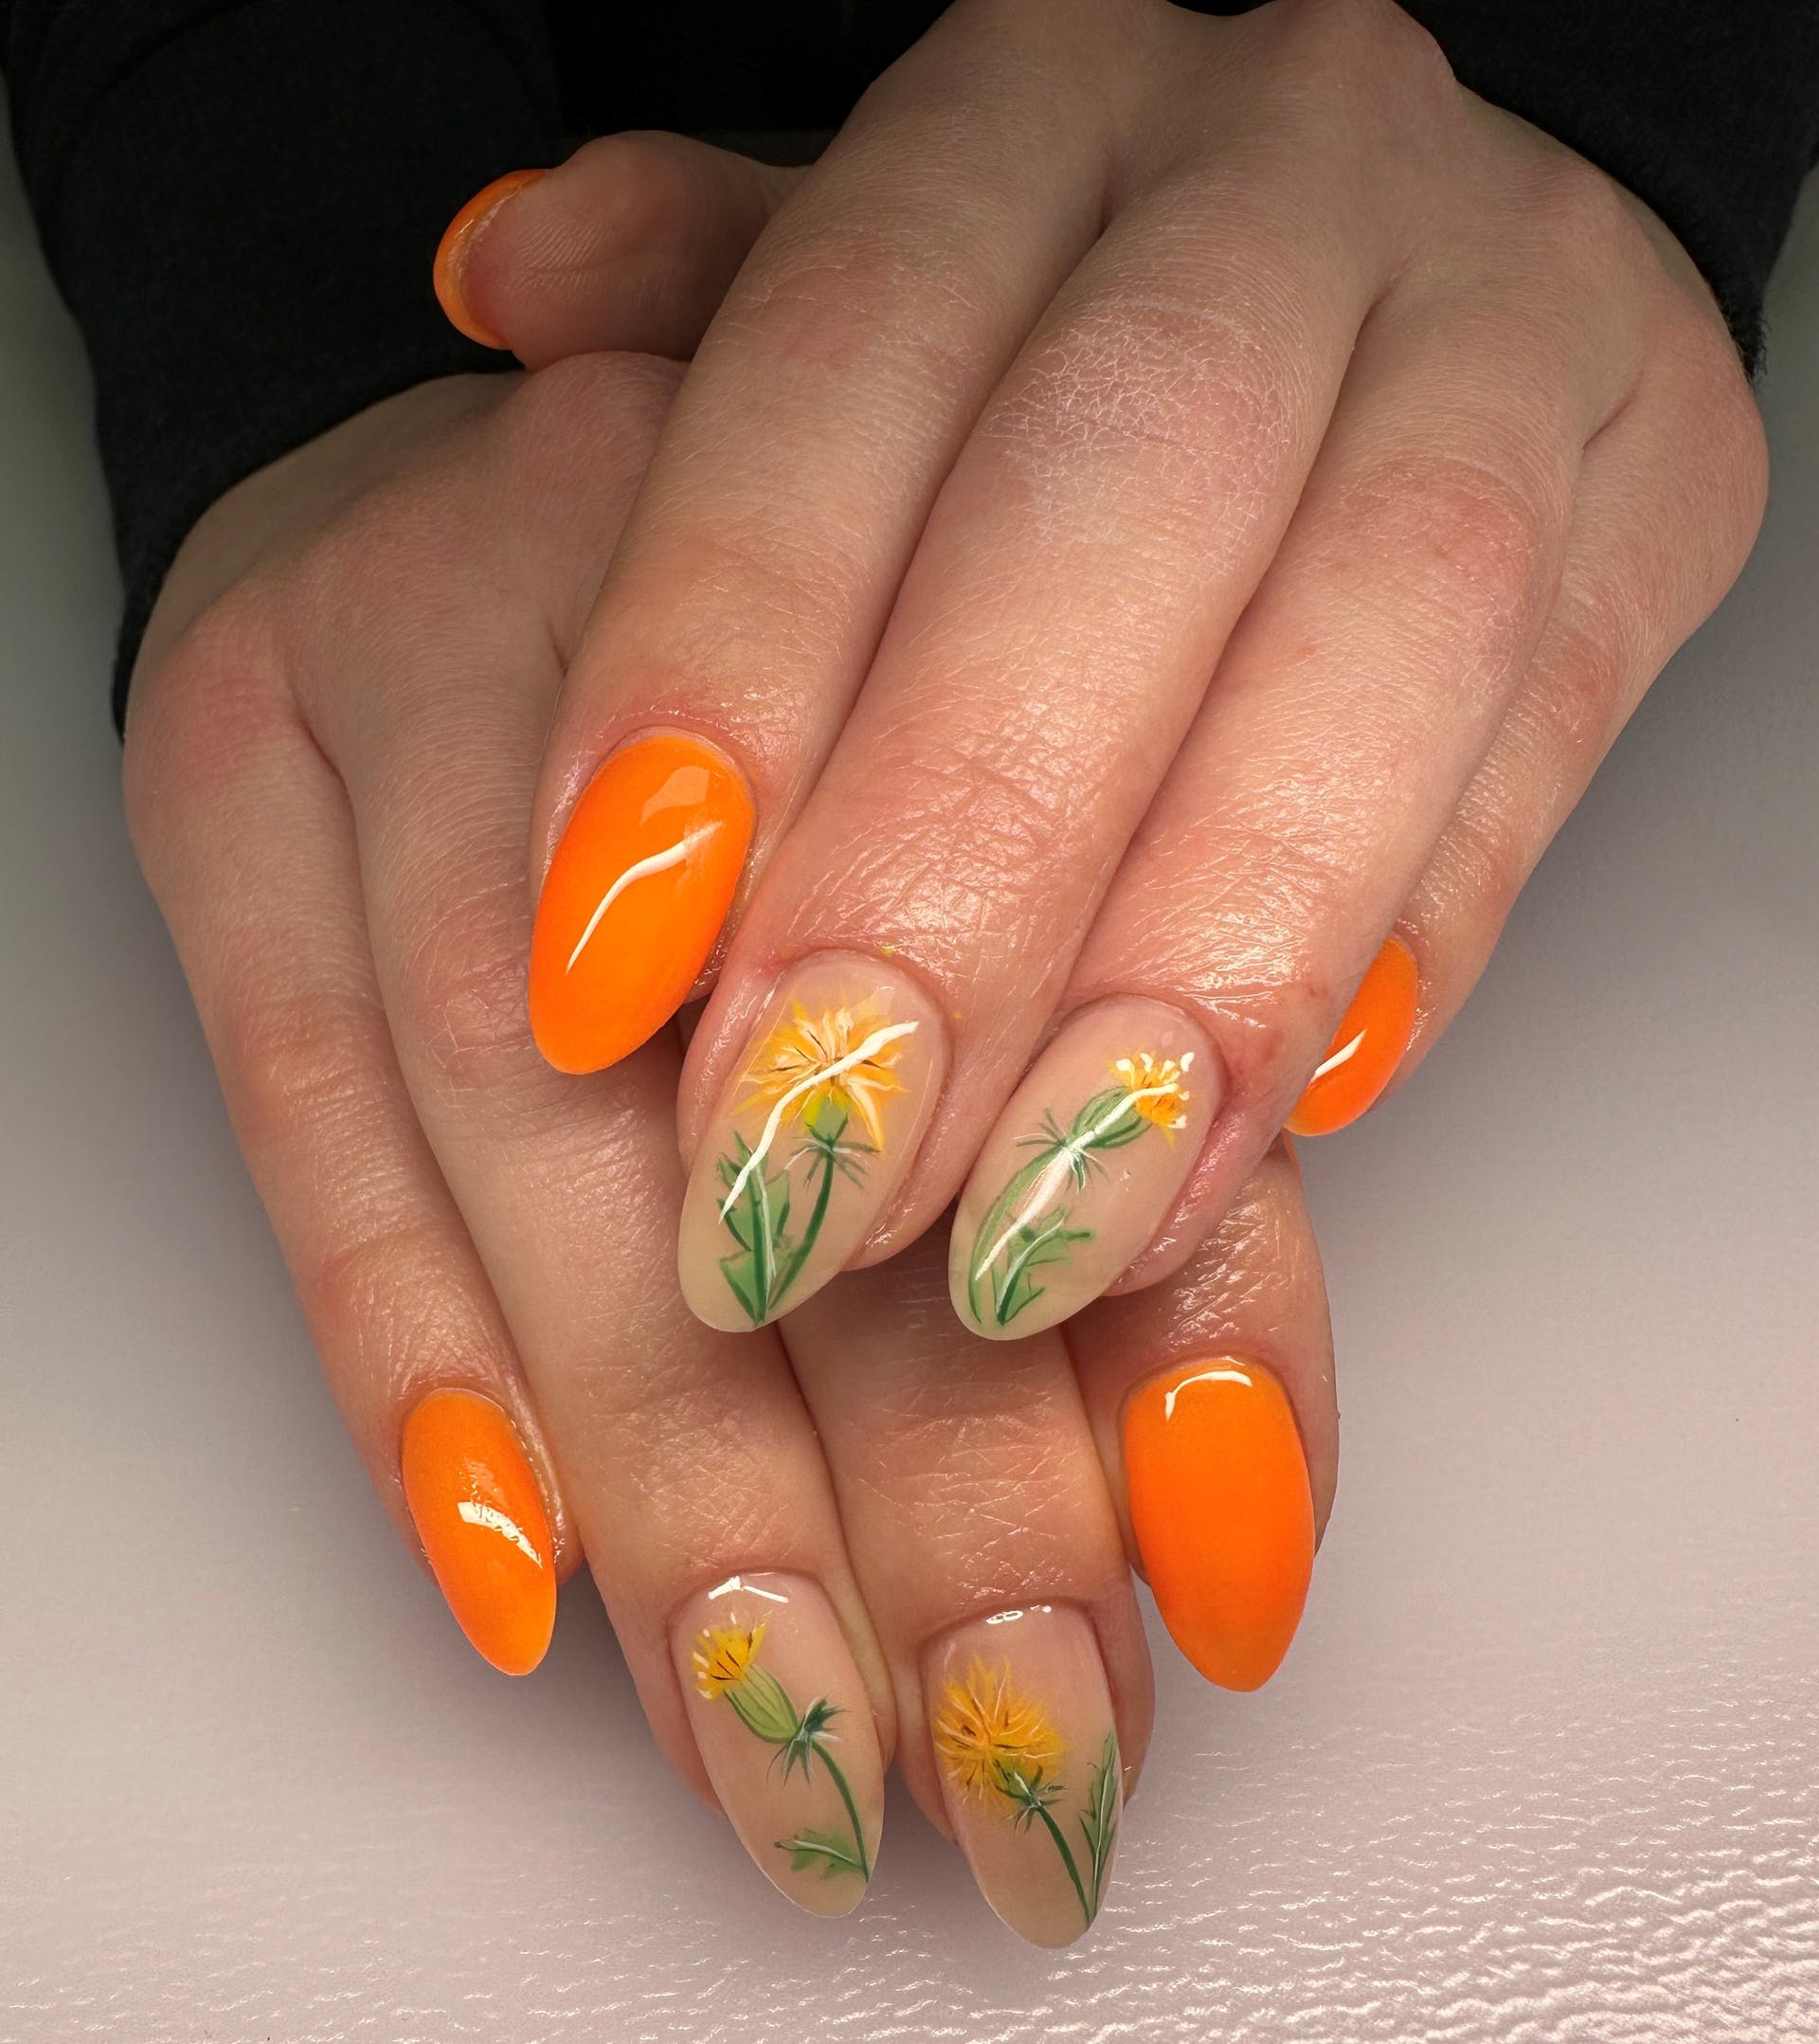 Orange nails with floral nail art accents.